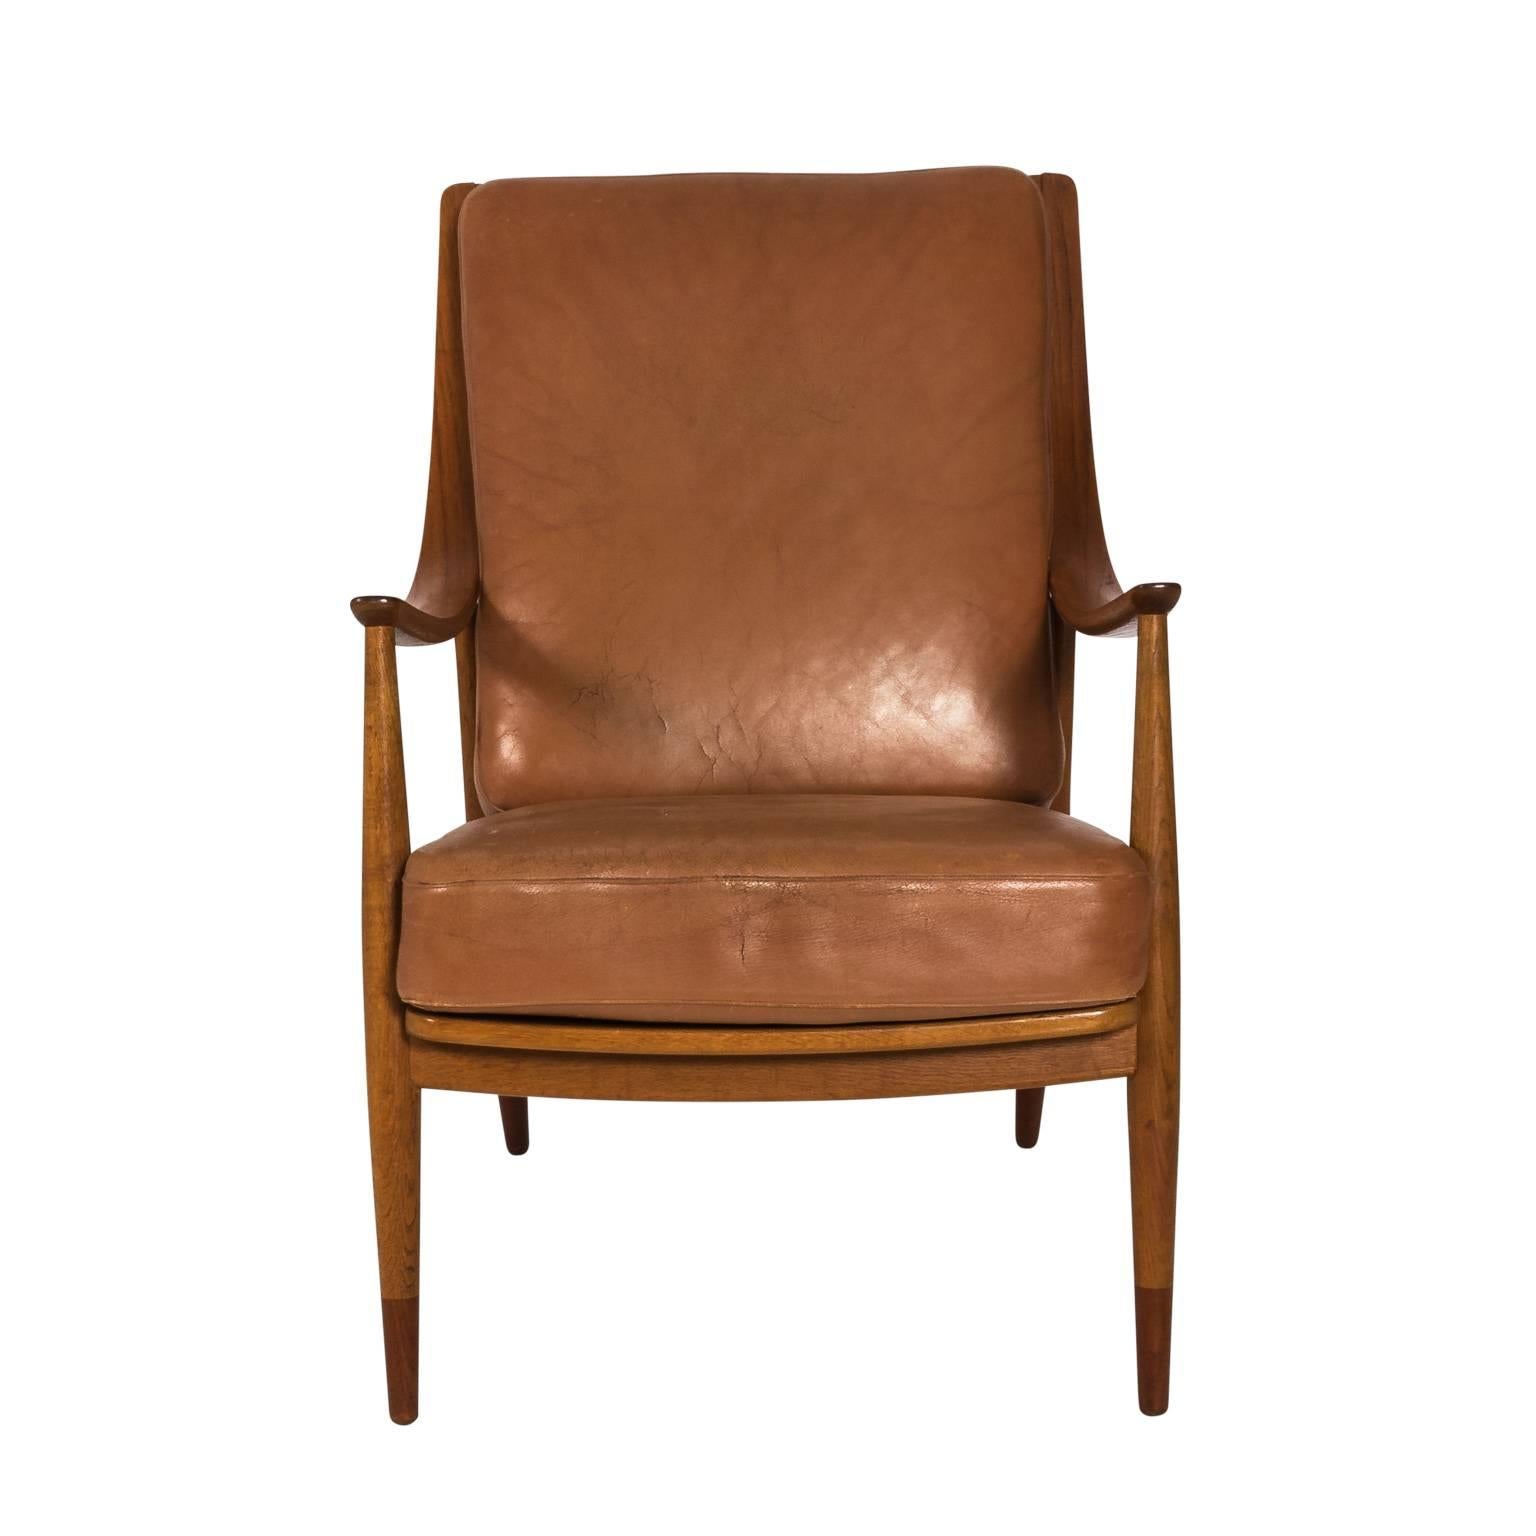 Classic chair by Peter Hvidt and Orla Mølgaard, the Danish design duo, circa midcentury. Well balanced teak frame with complementing leather seat creates an ideal balance of form and function.
 